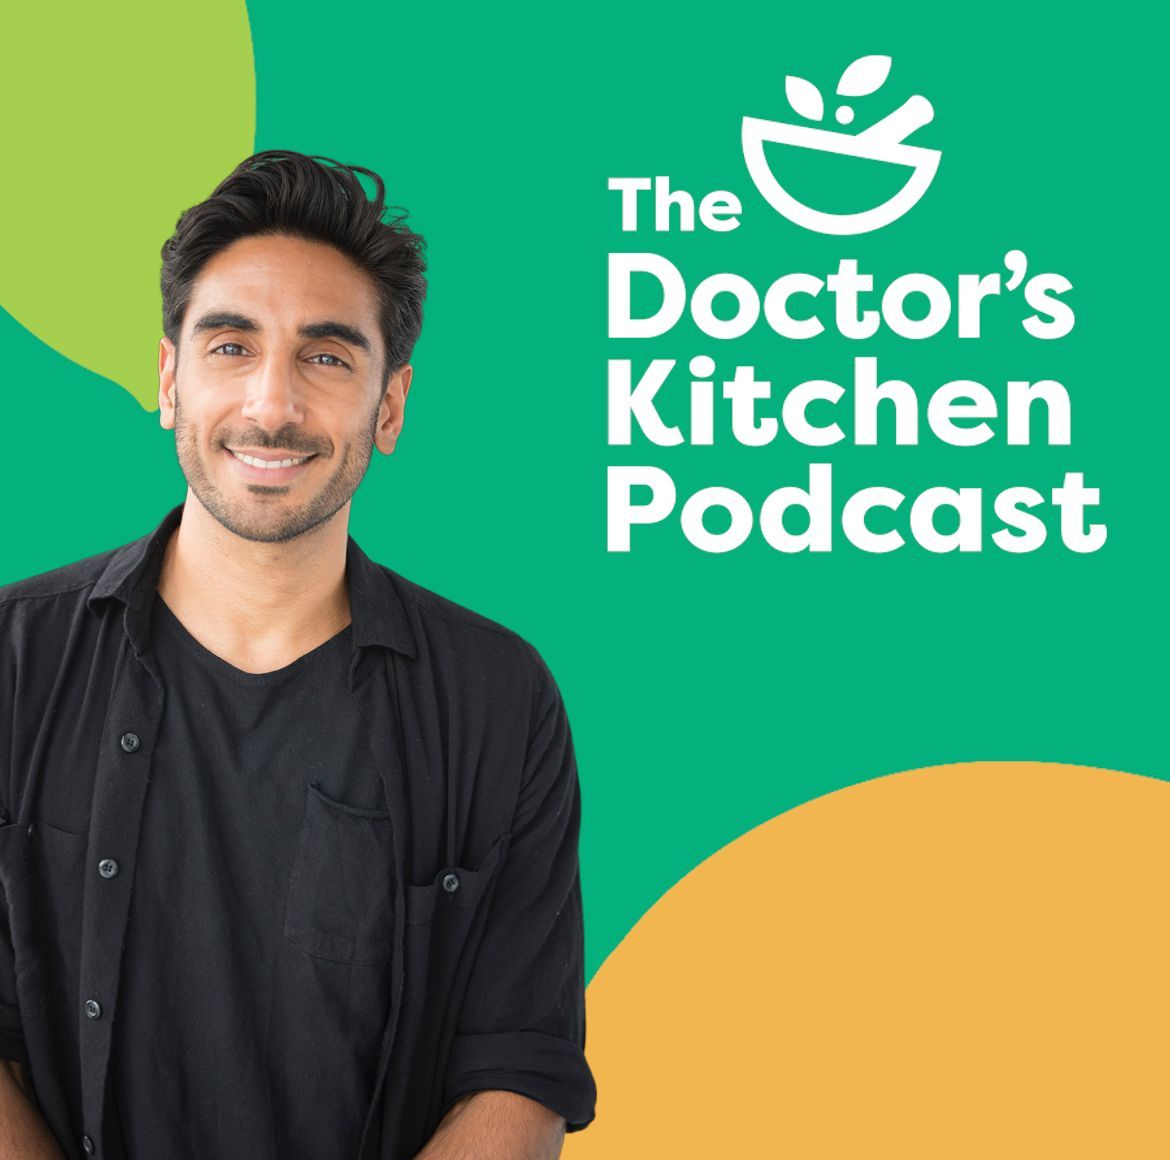 New episode alert! Preventing heart disease is crucial for a healthy life. Stay informed with this week's episode! Snacksize 9: Preventing Heart Disease Listen on your favourite podcast player buff.ly/3tGLgOC